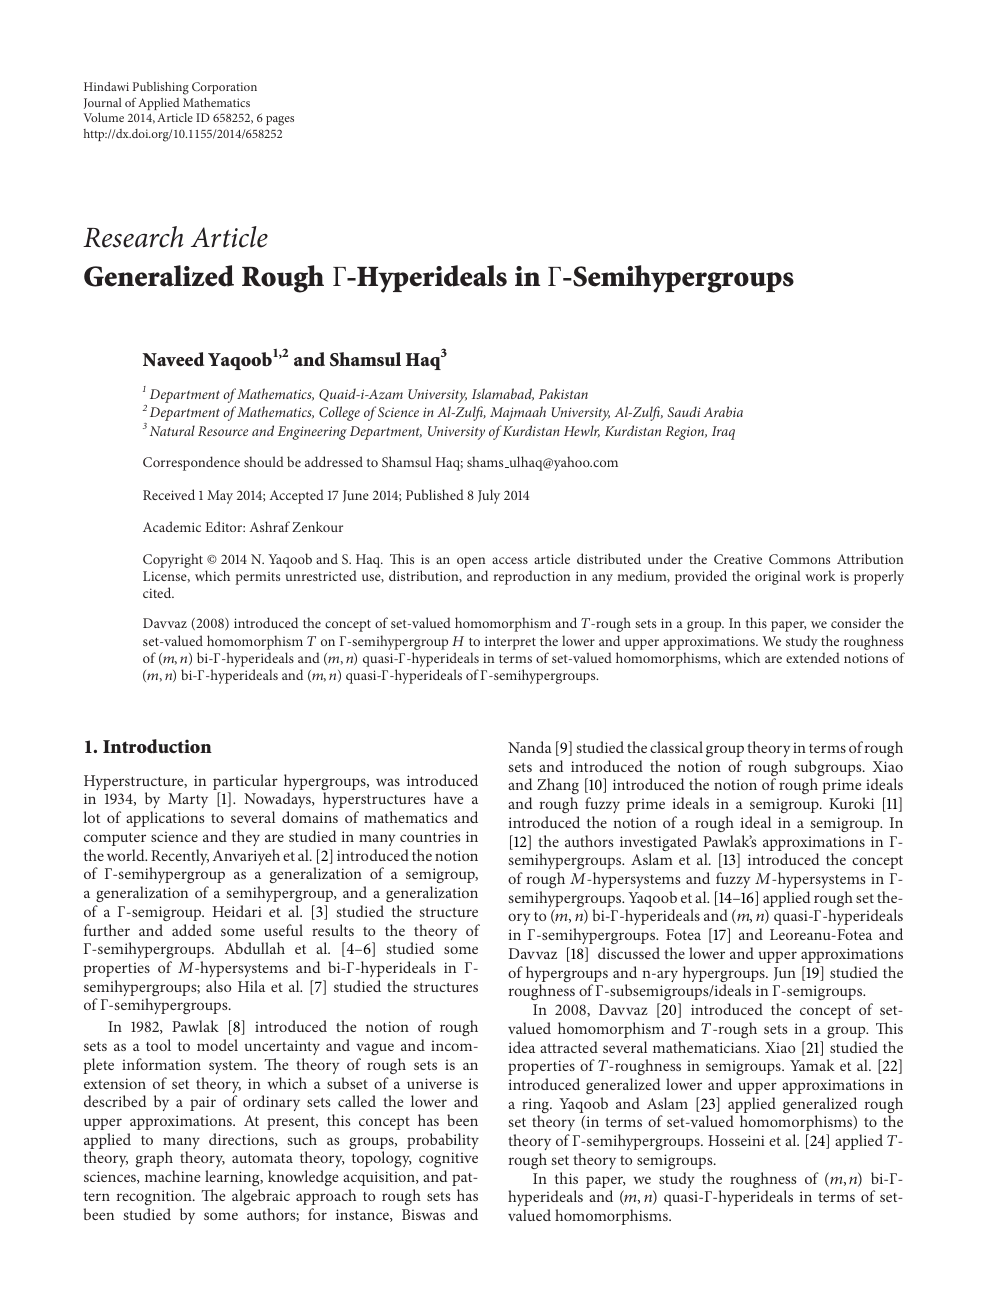 Generalized Rough G Hyperideals In G Semihypergroups Topic Of Research Paper In Mathematics Download Scholarly Article Pdf And Read For Free On Cyberleninka Open Science Hub